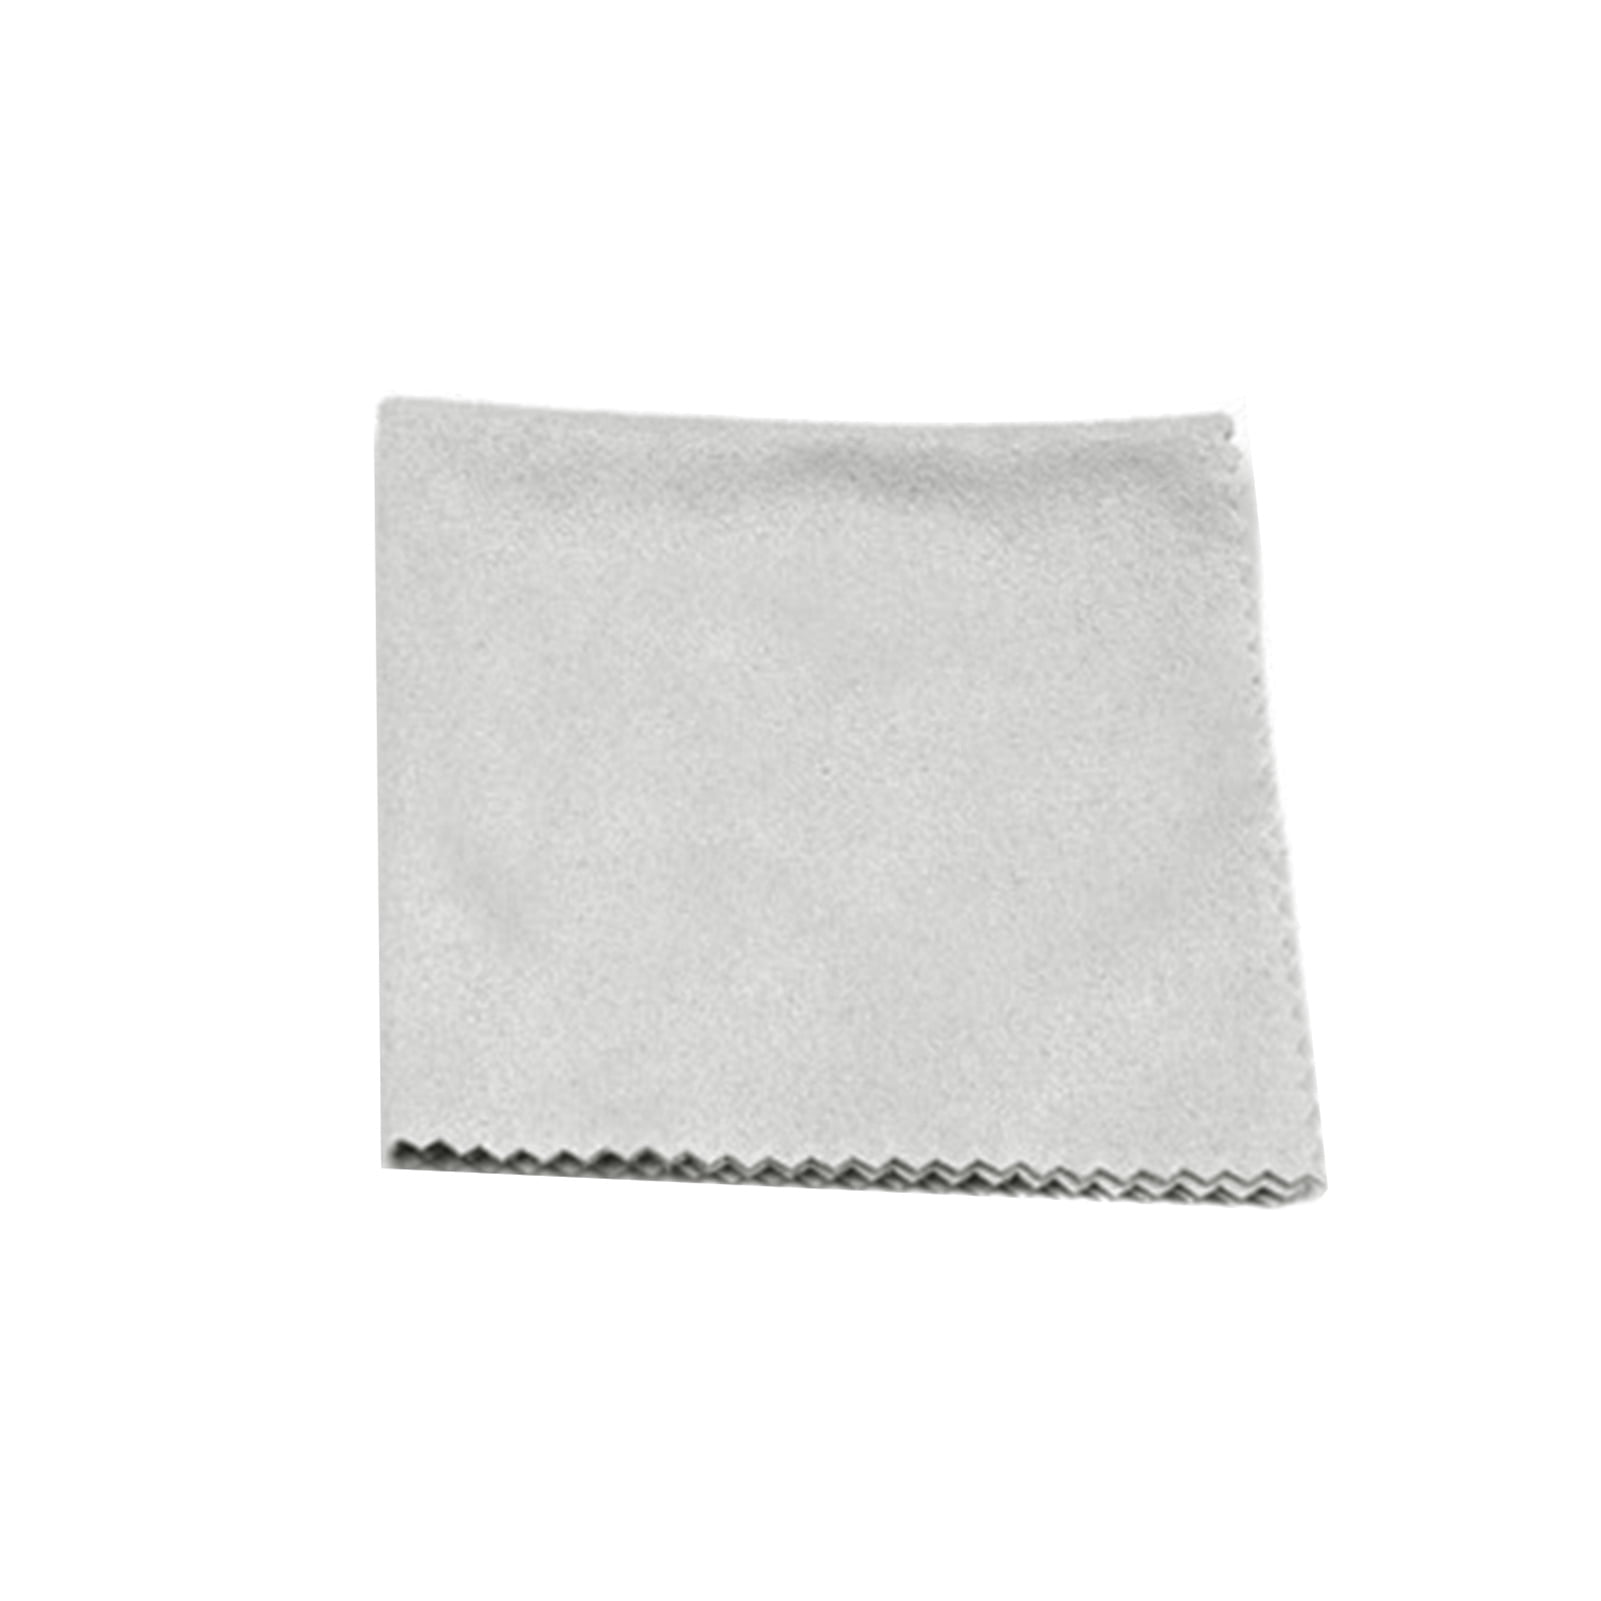 Details about   Microfiber Cleaner Cleaning Cloth For Phone Screen Camera Lens Eye Glasses Lens 